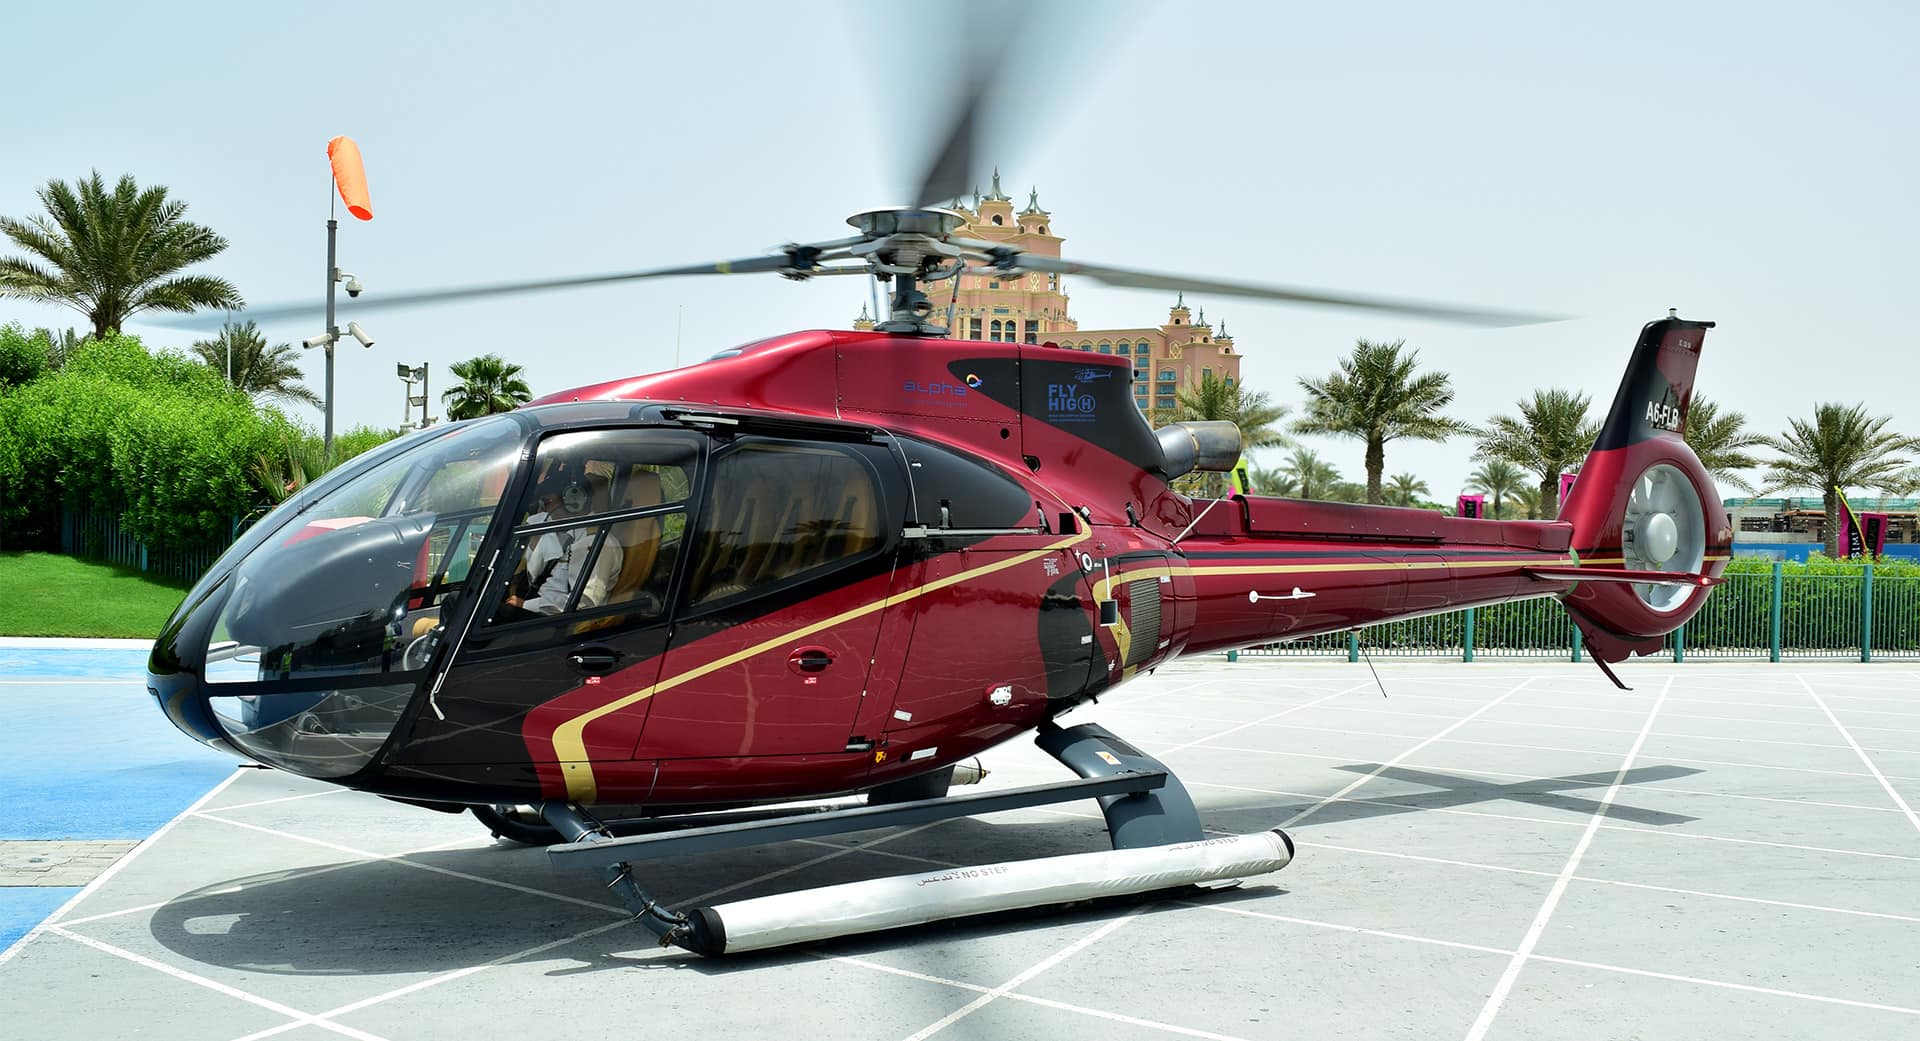 How to Prepare for an Atlantis Helicopter Ride